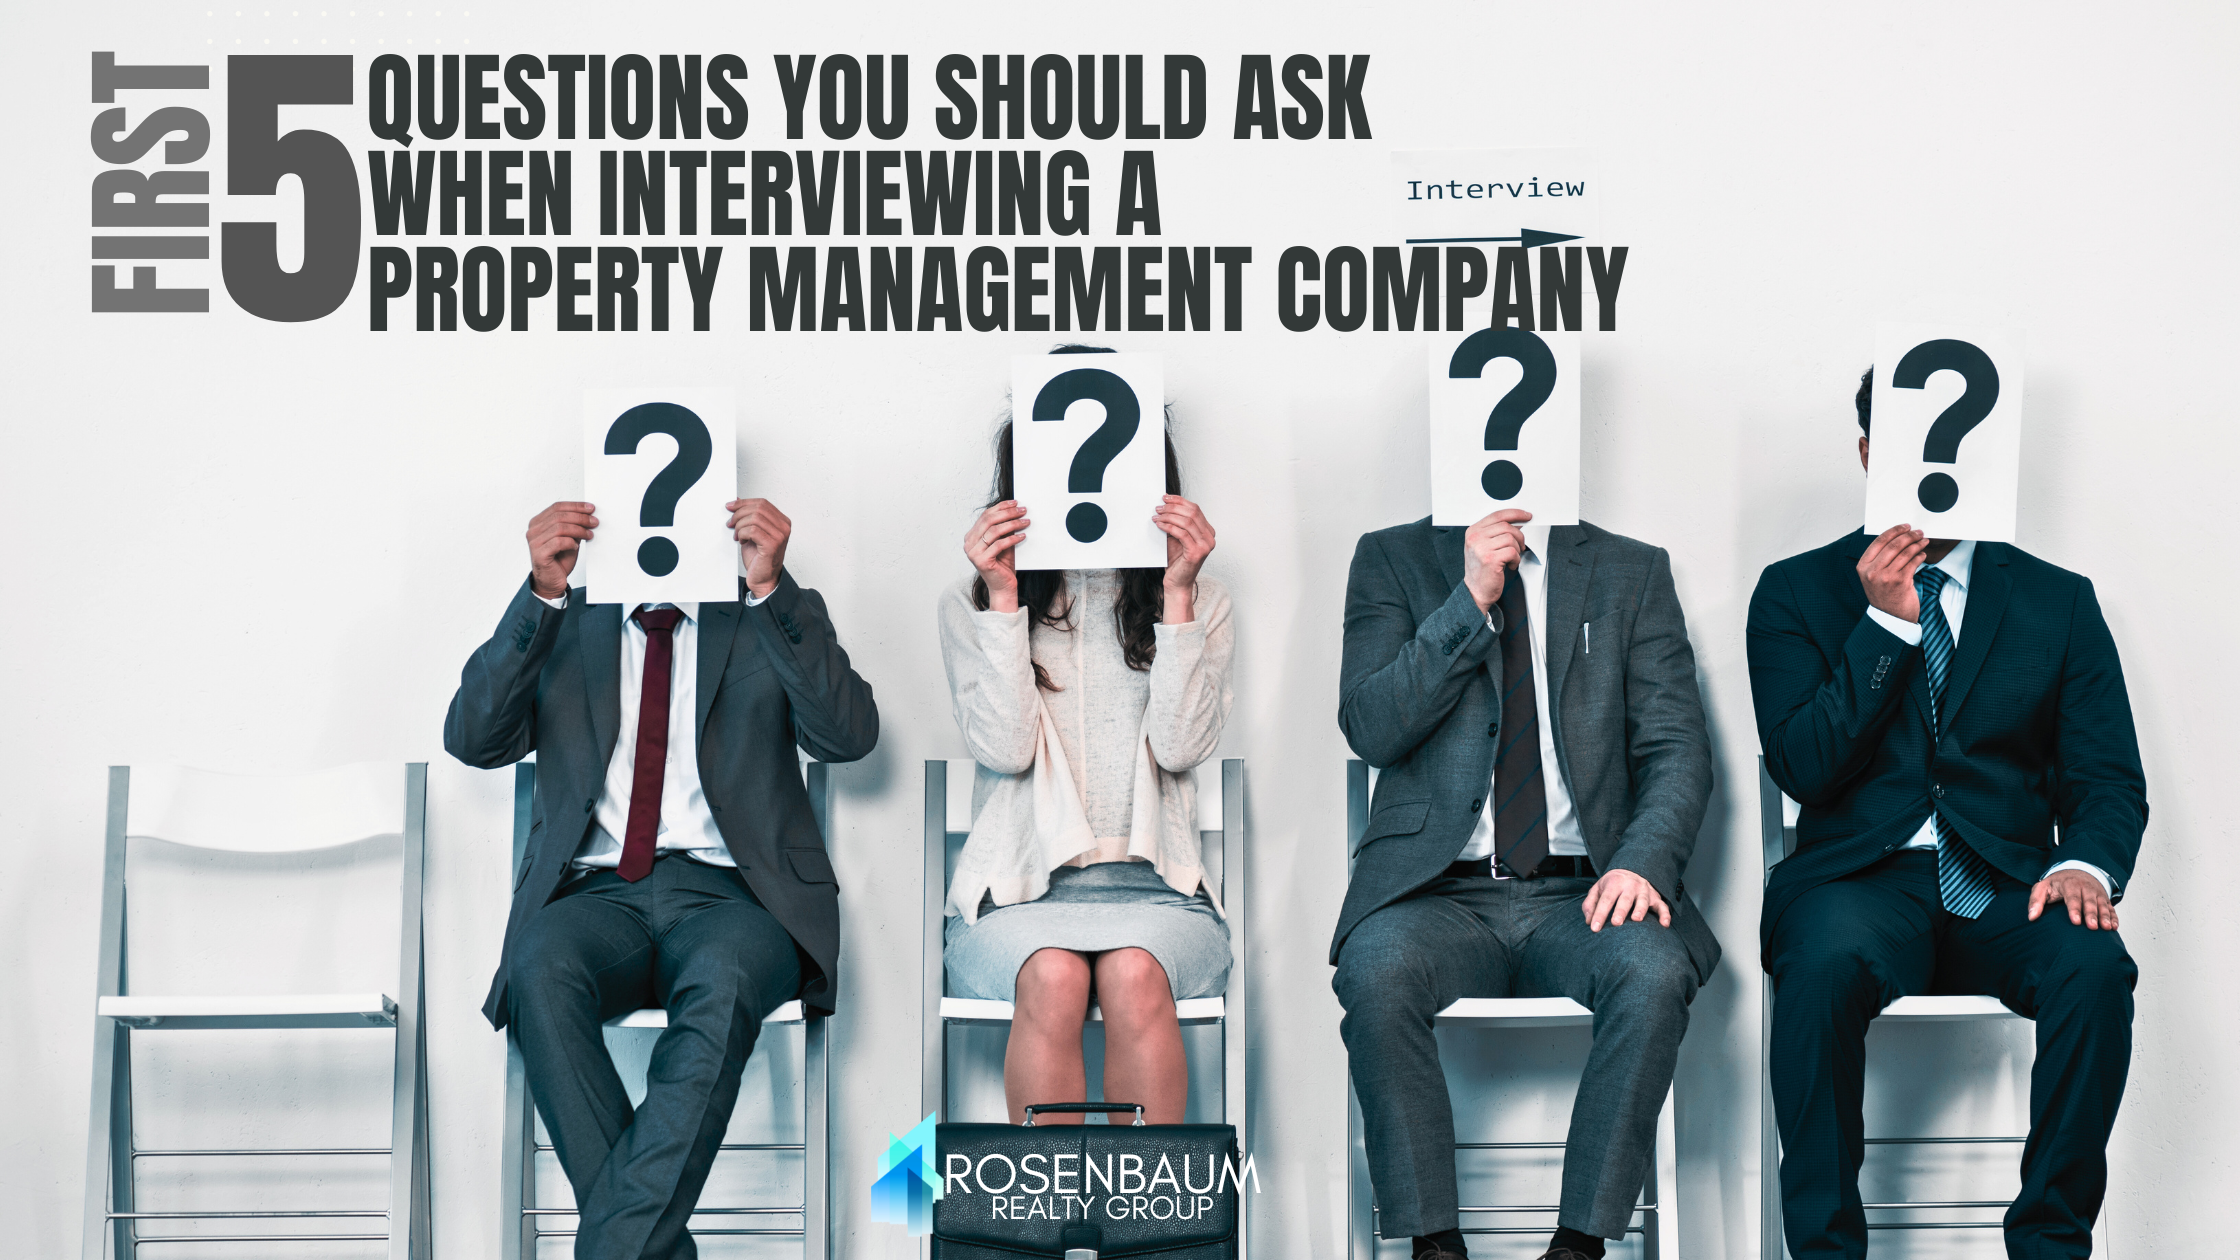 The Top 5 Essential Questions to Ask When Interviewing a Property Management Company